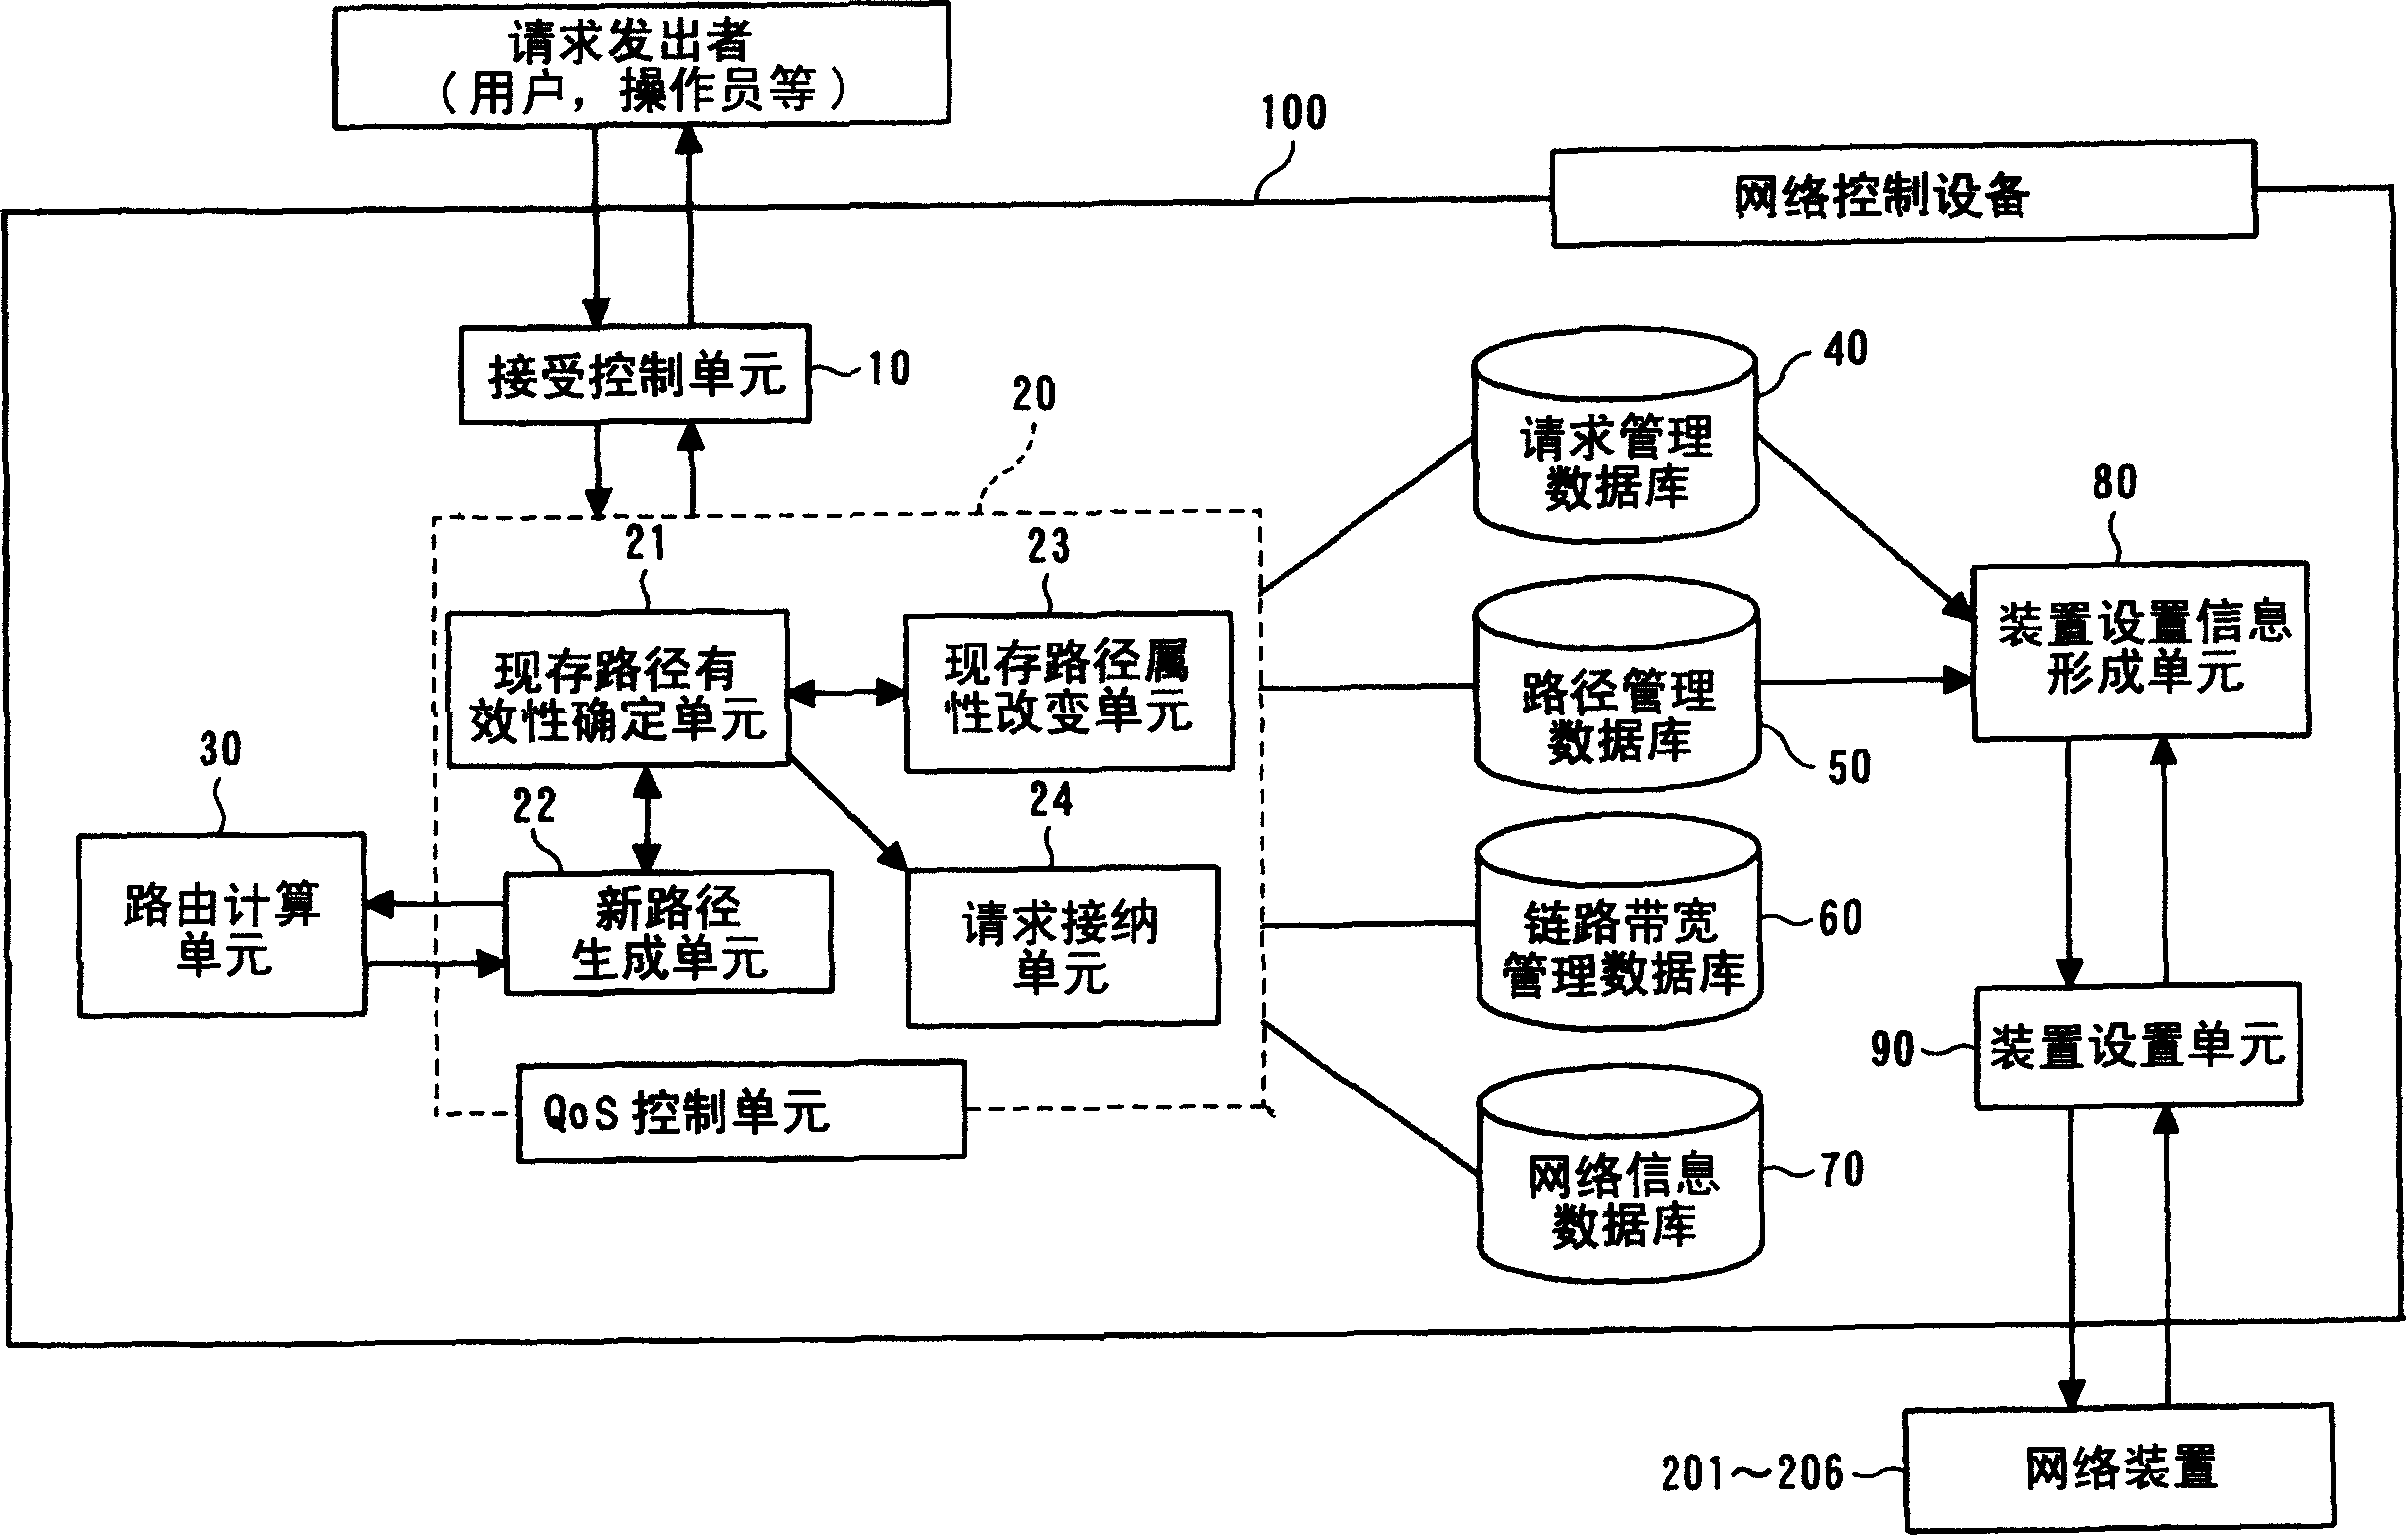 Network controlling apparatus and path controlling method therein